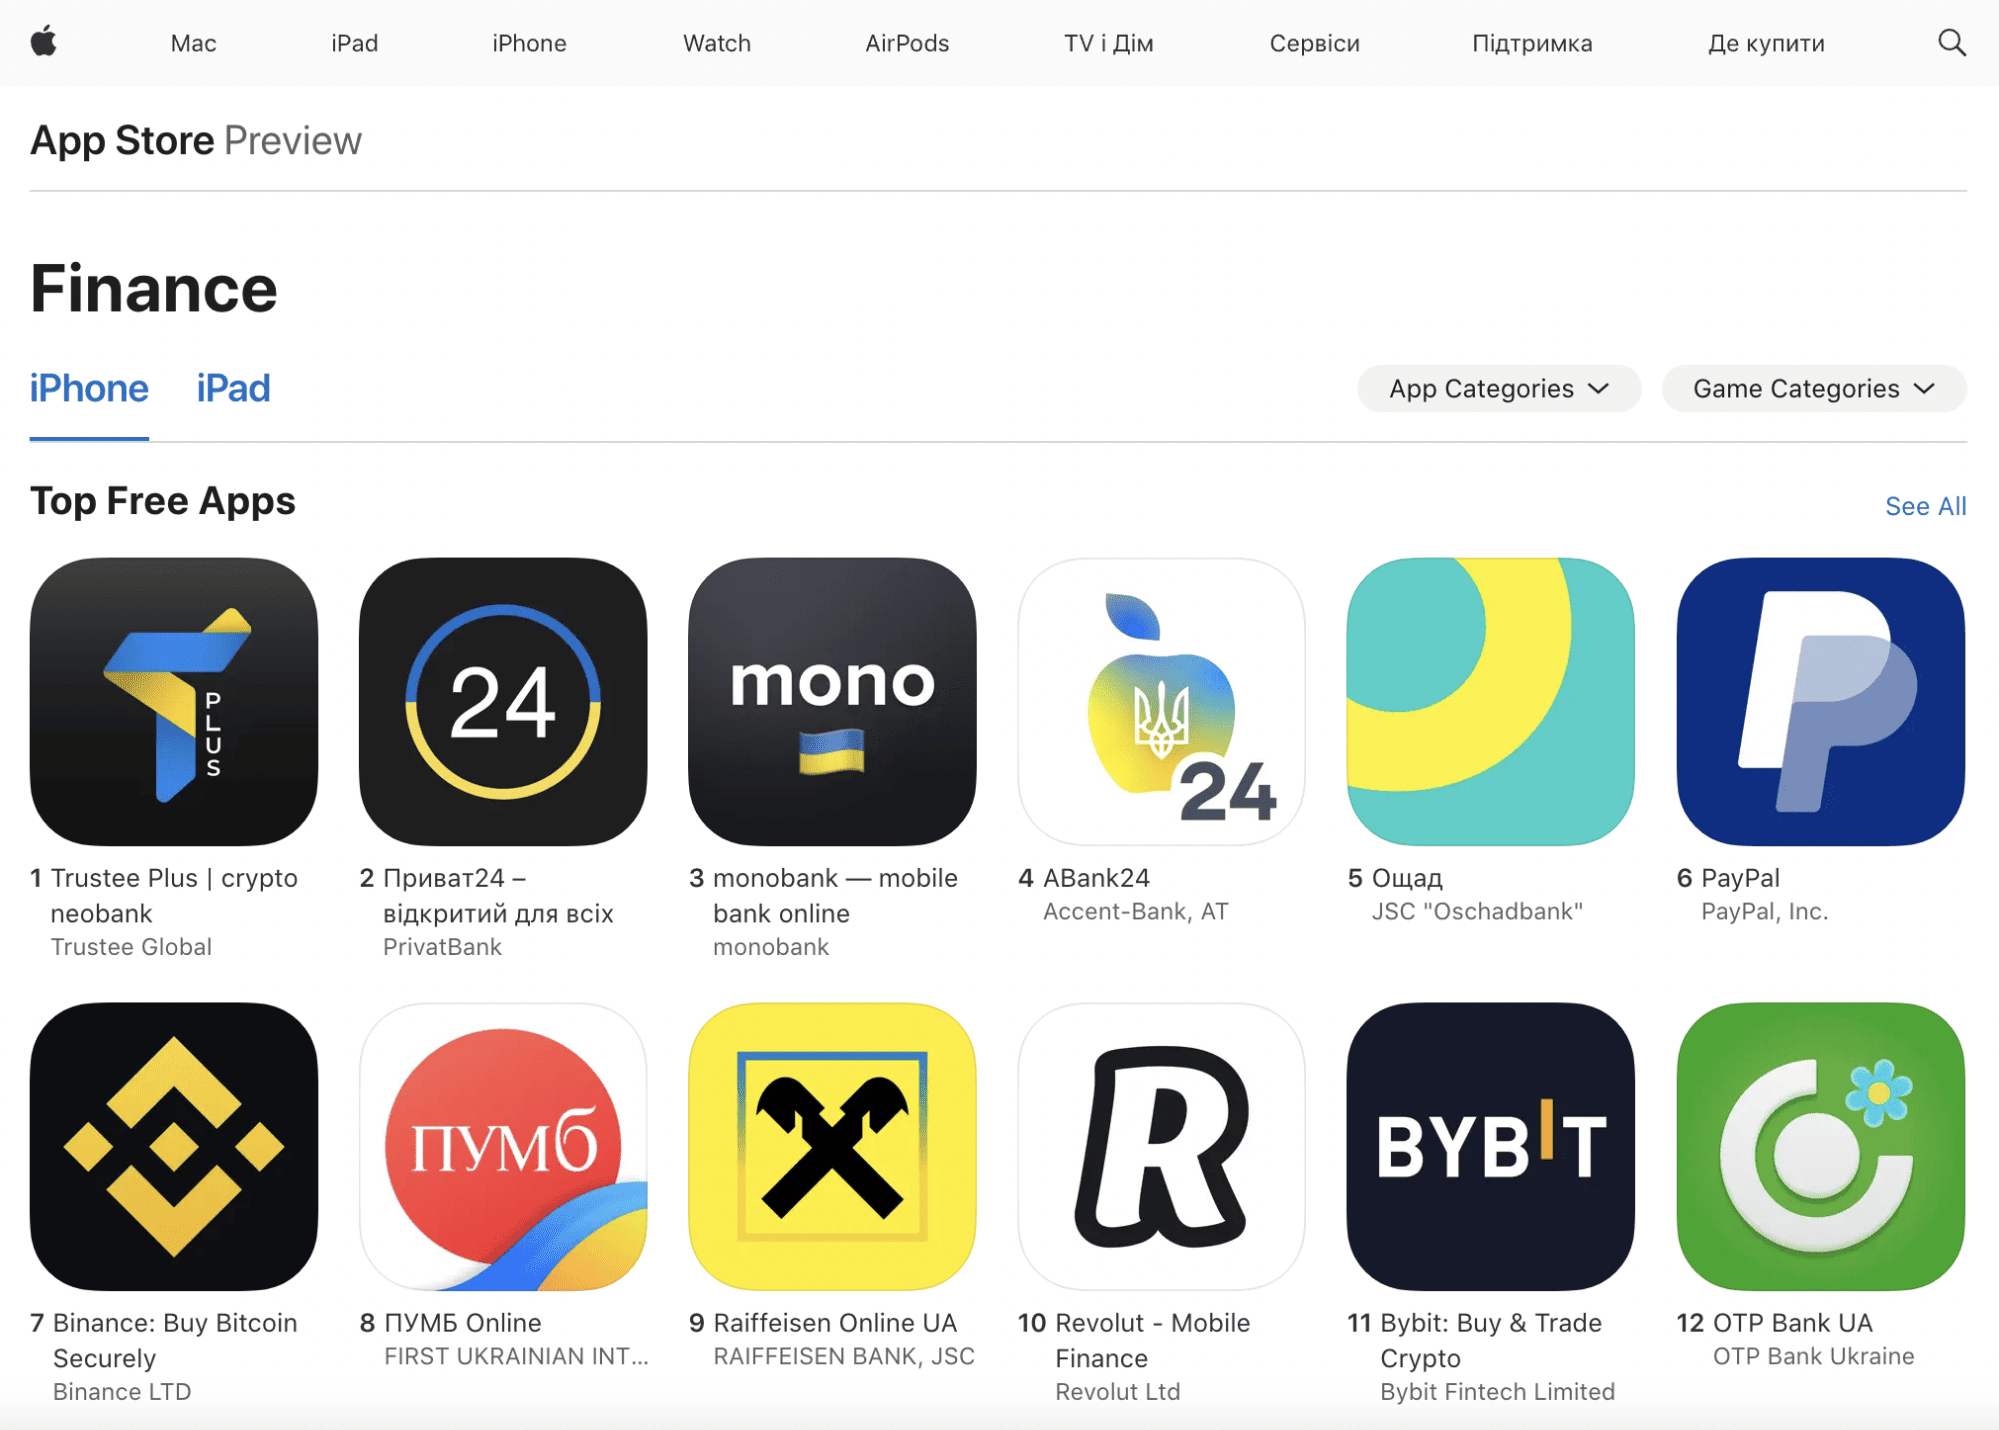 Trustee Plus Crypto App Ranked First in the Ukrainian App Store in the ''Finance'' Section